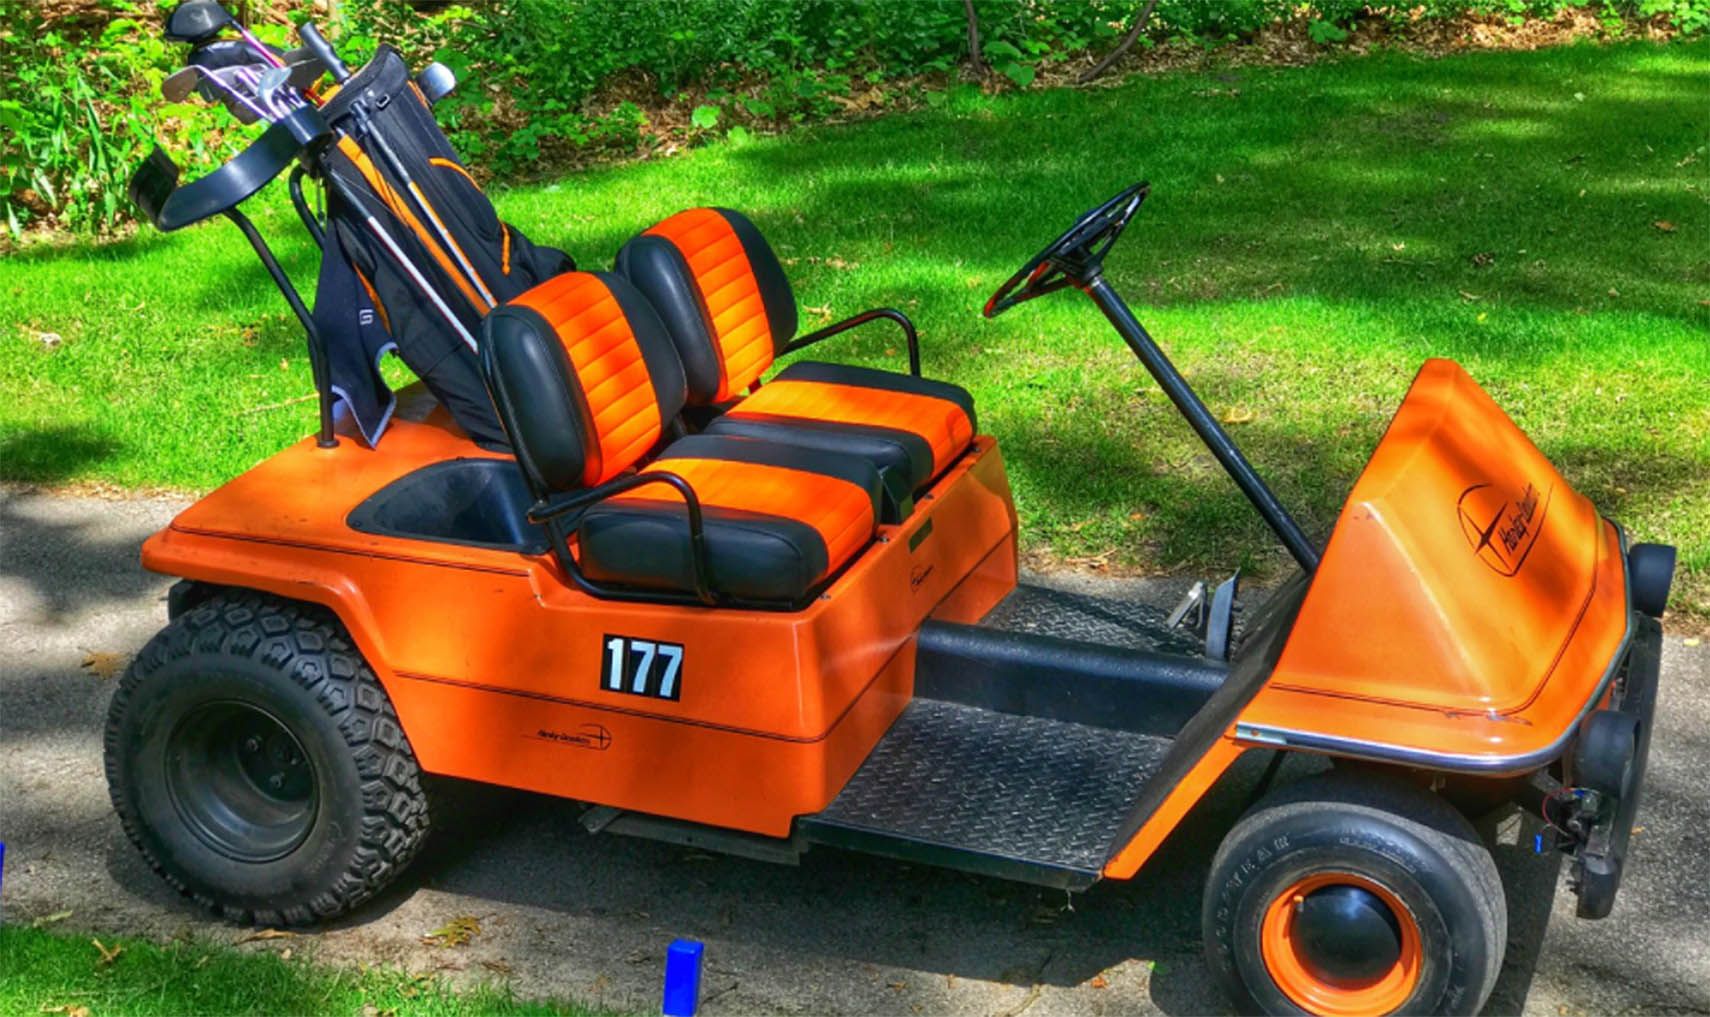 Harley-Davidson Golf Carts: The History Of A Little-Known Rarity